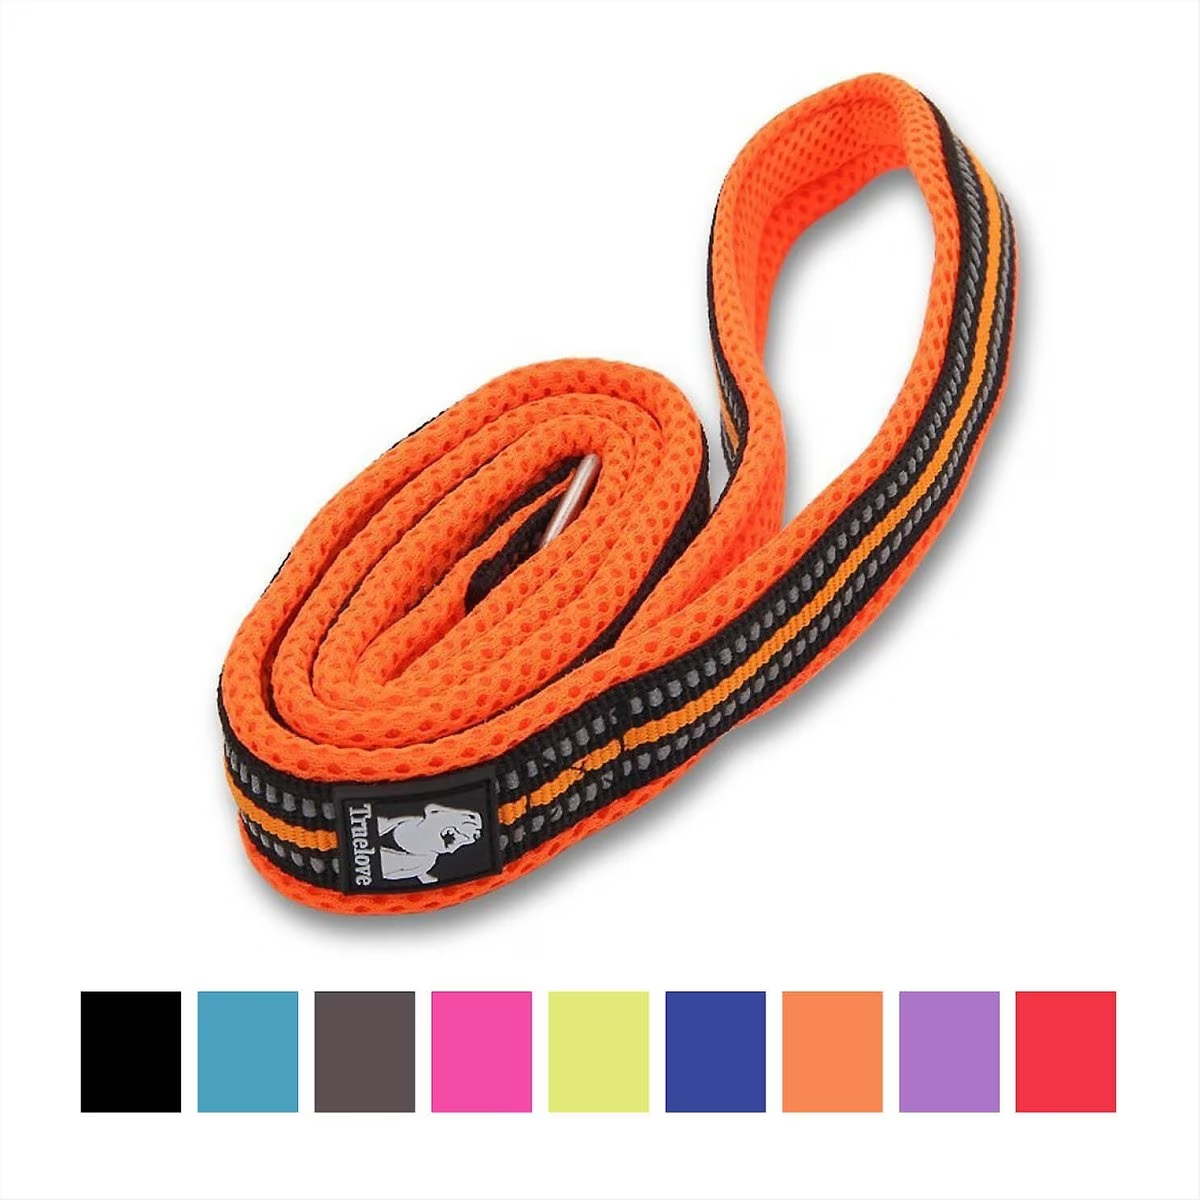 Chai's Choice Premium Outdoor Adventure Padded 3M Polyester Reflective Dog Leash